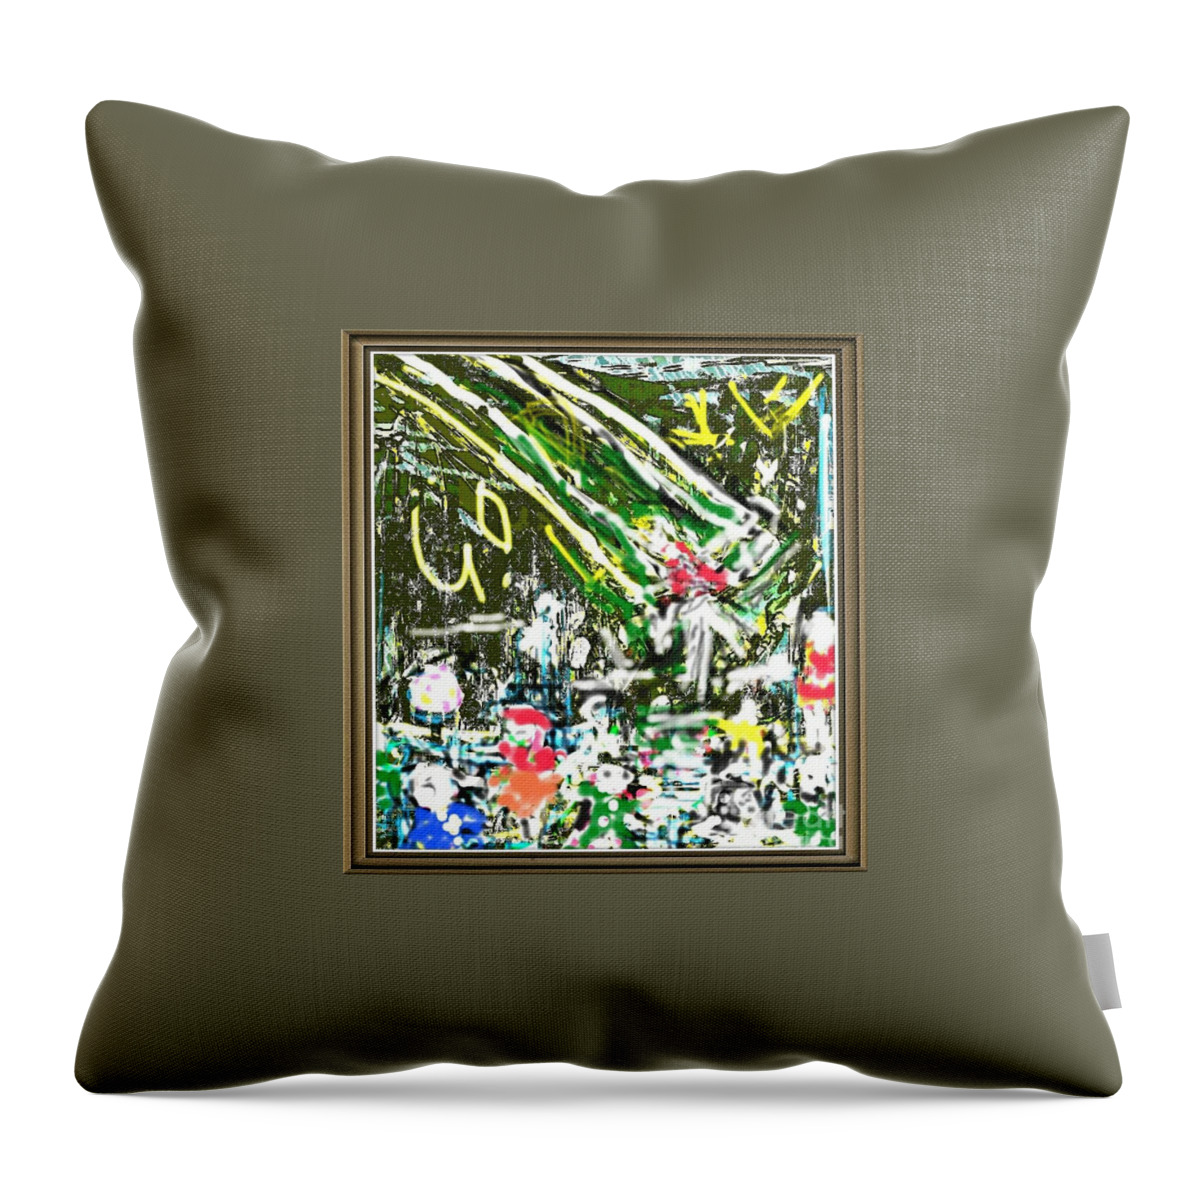 Abstract Throw Pillow featuring the painting God lives at the children park by Subrata Bose